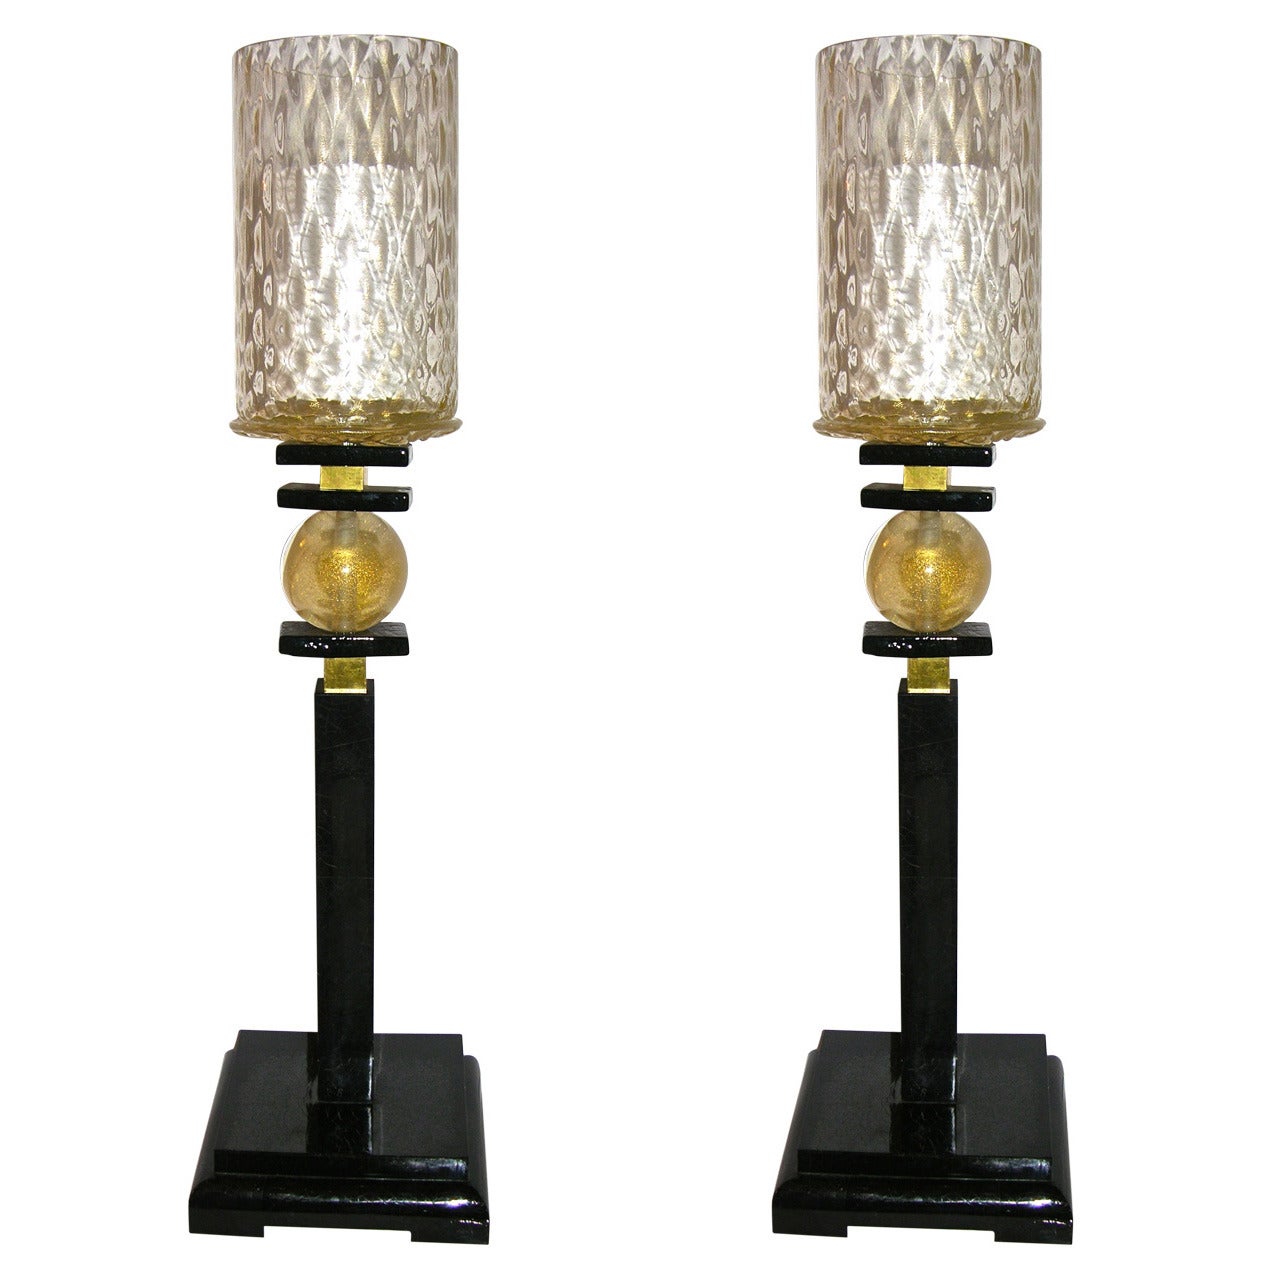 1970s Italian Pair of Art Deco Design Lamps with Murano Glass Shades by Barovier